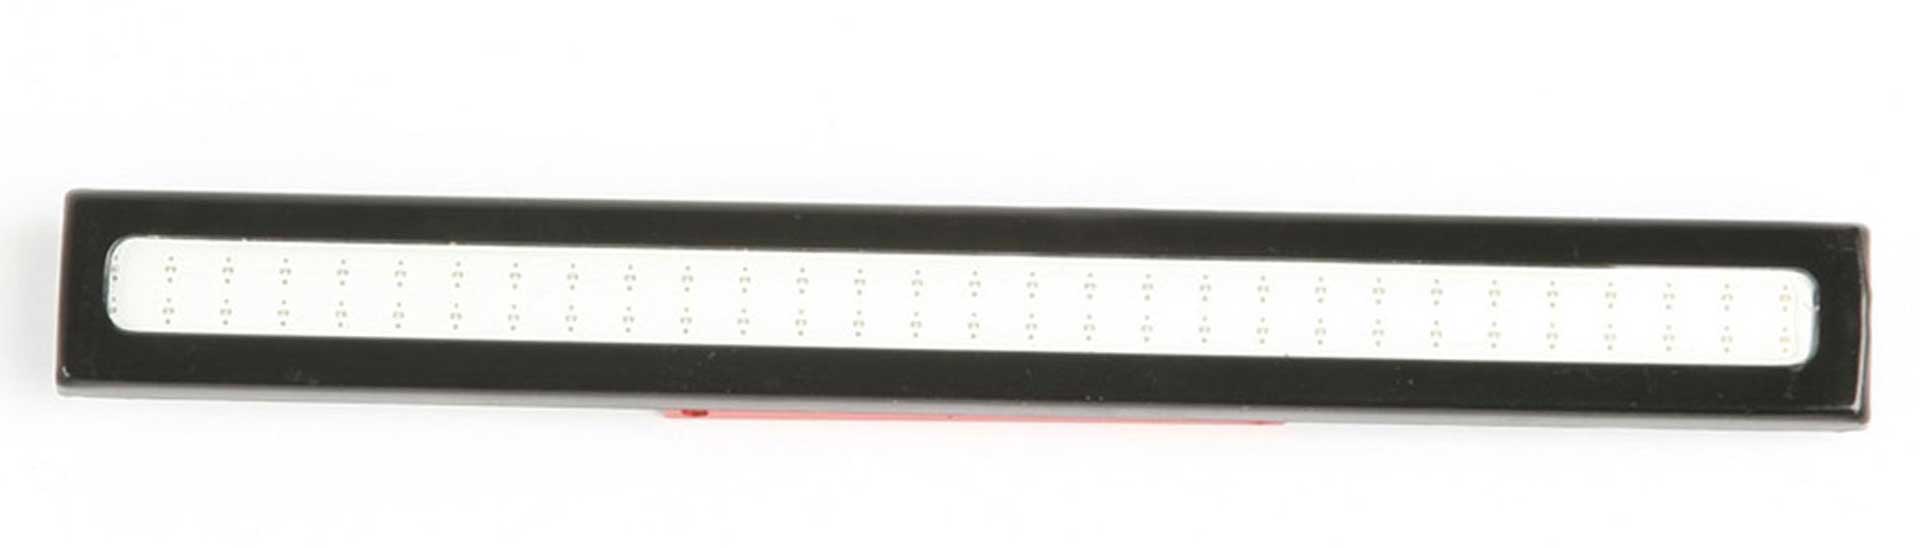 E-TURBINE REAR LIGHT BEAM WITH GREEN LED FOR ETB25 RACECOPTER